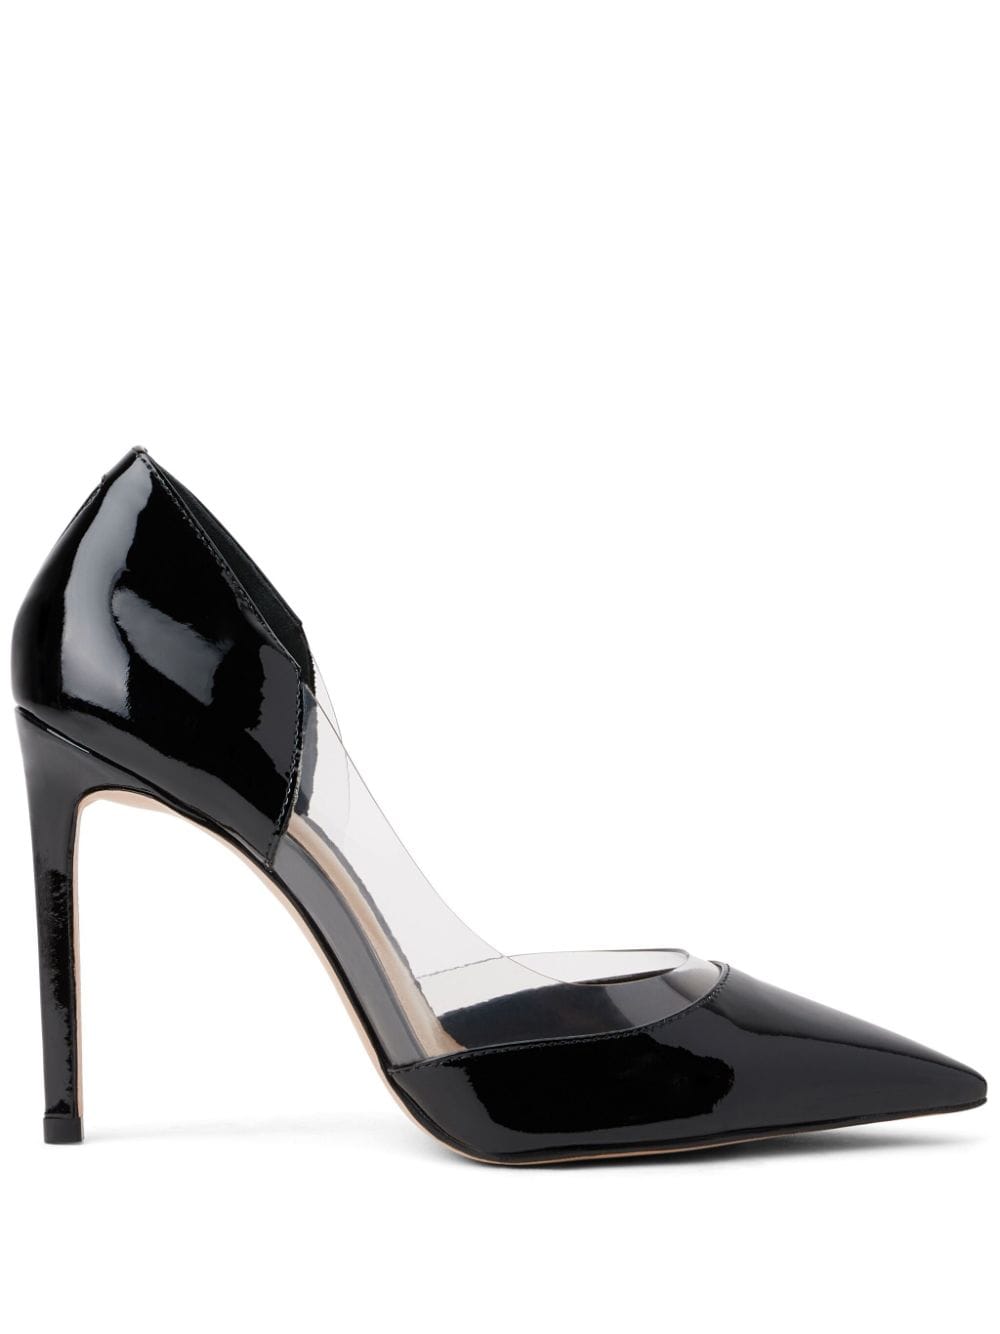 Schutz 105mm pointed-toe Leather Pumps - Farfetch